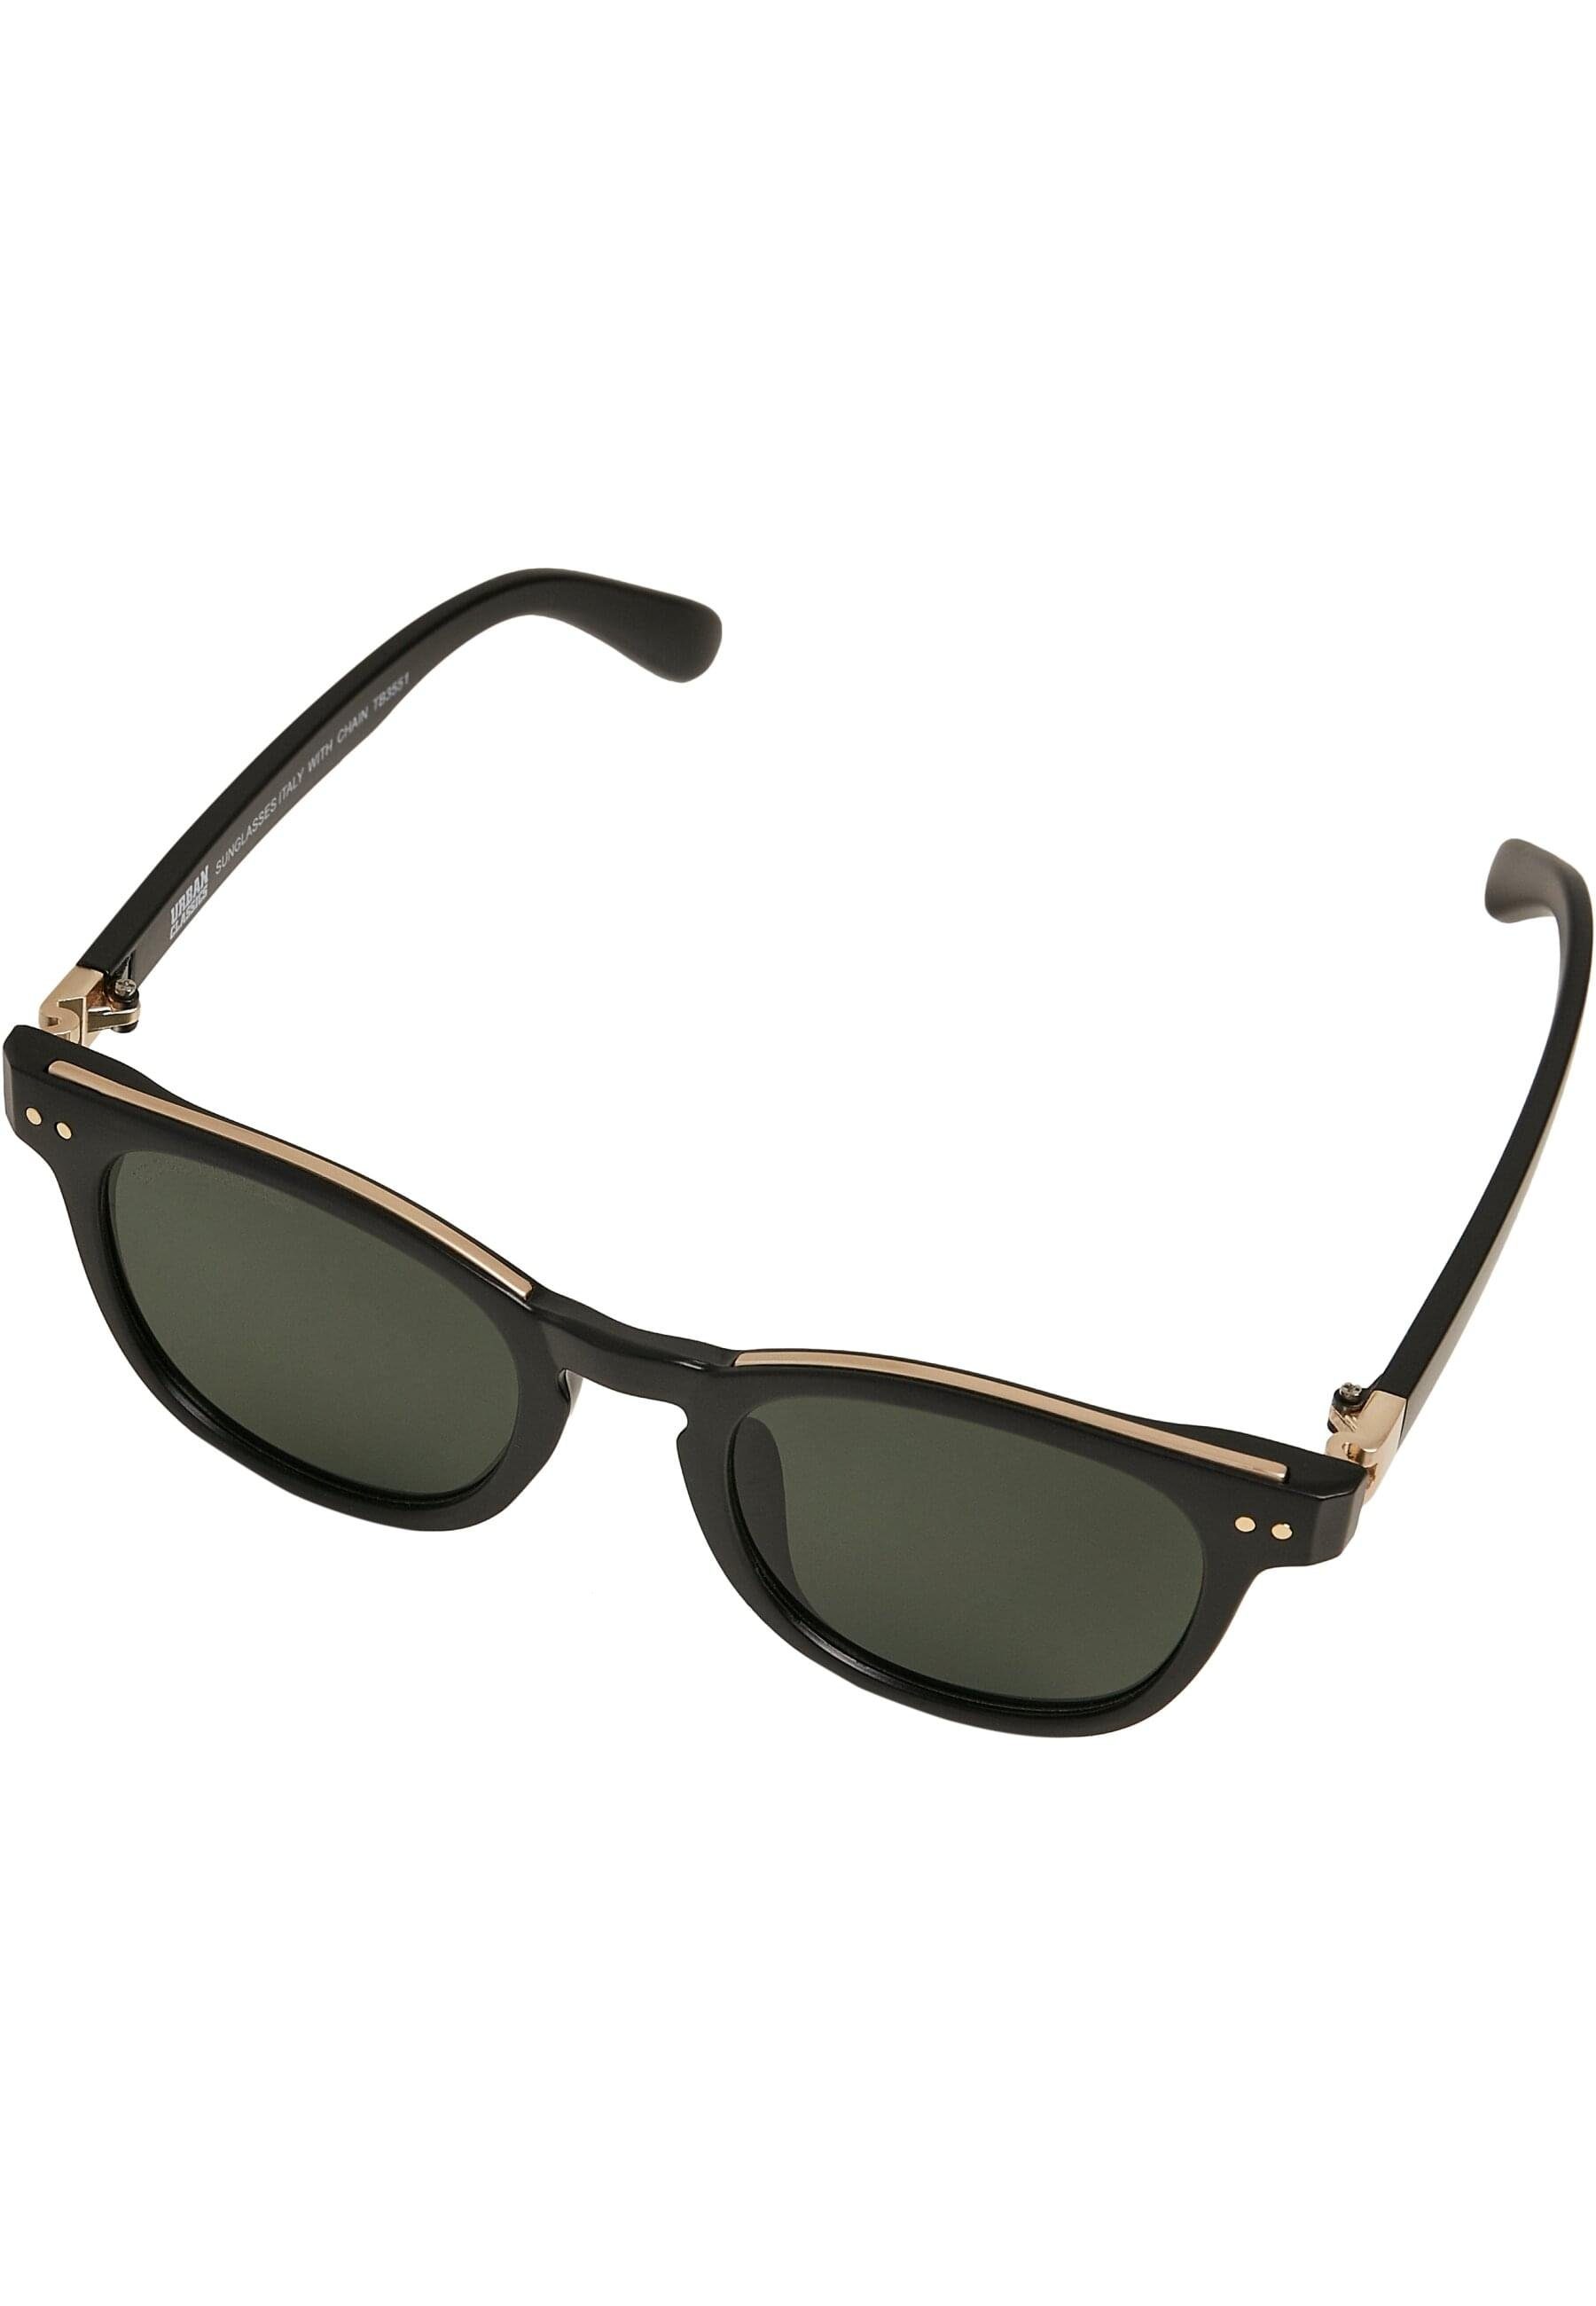 black/gold/gold URBAN Sunglasses CLASSICS Sonnenbrille chain Unisex with Italy